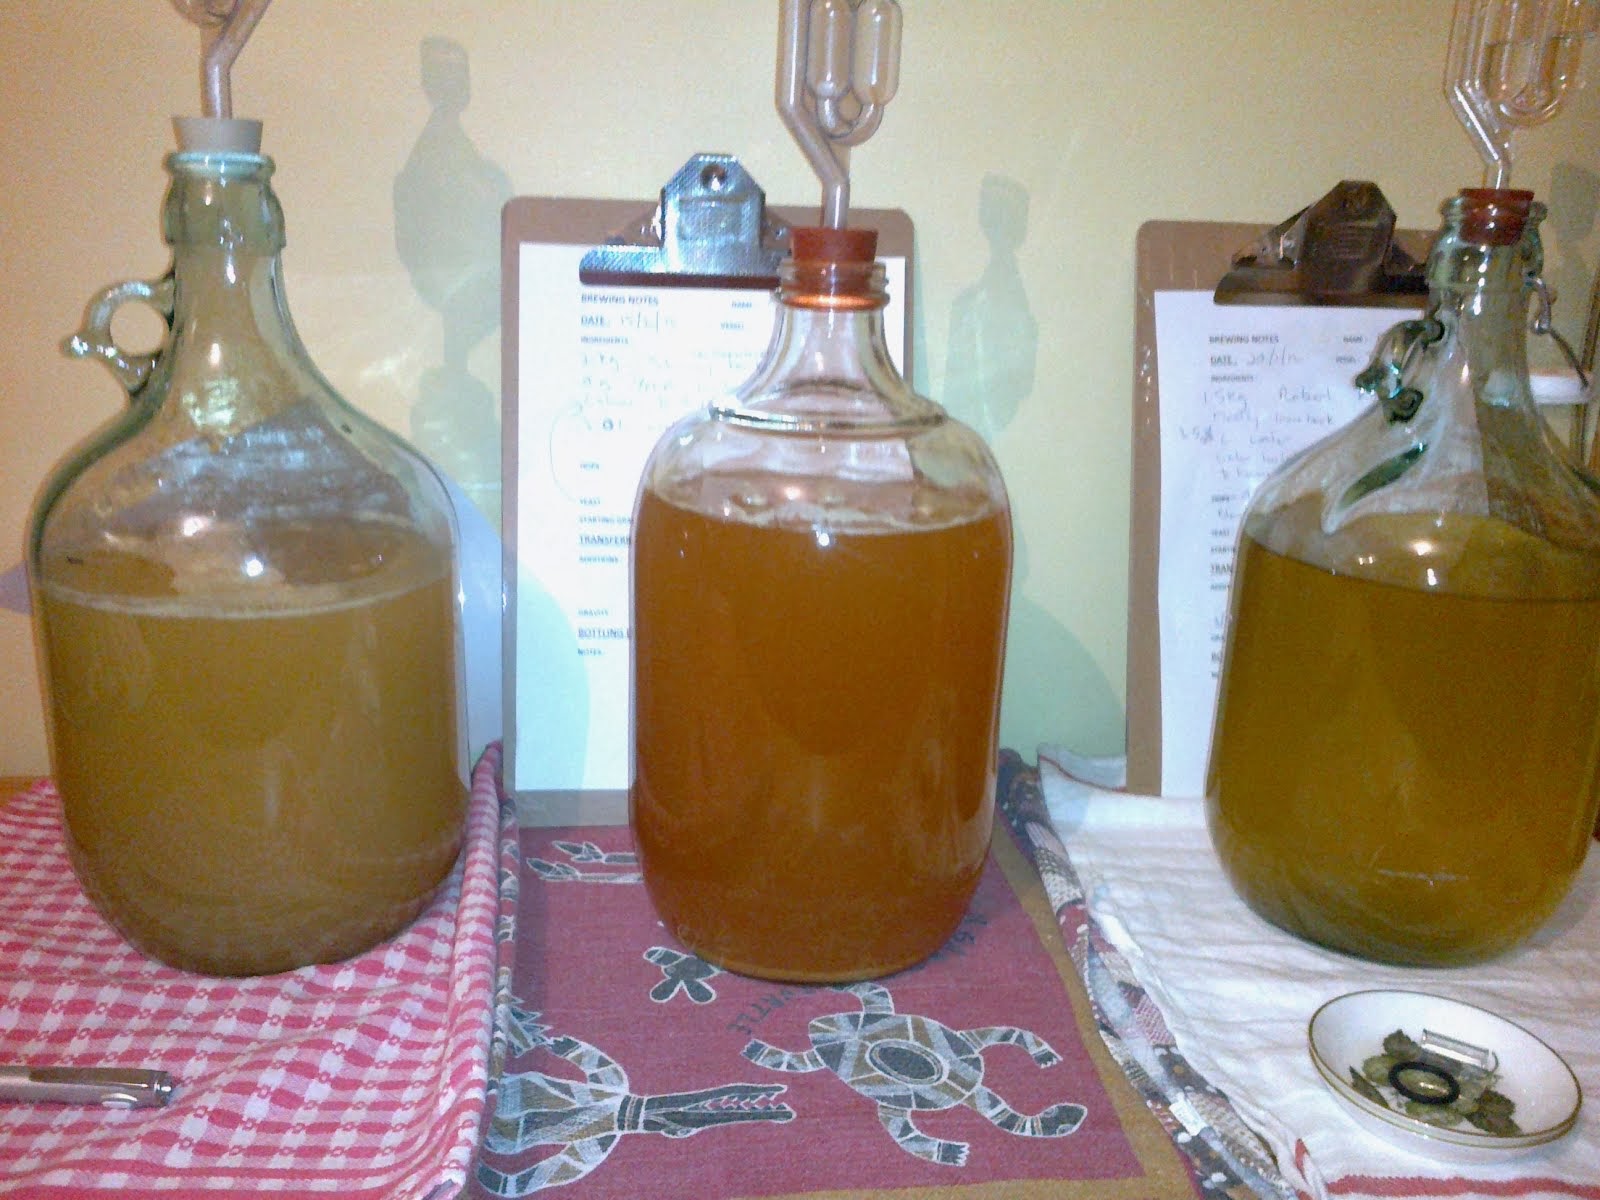 Mead Glorious Mead